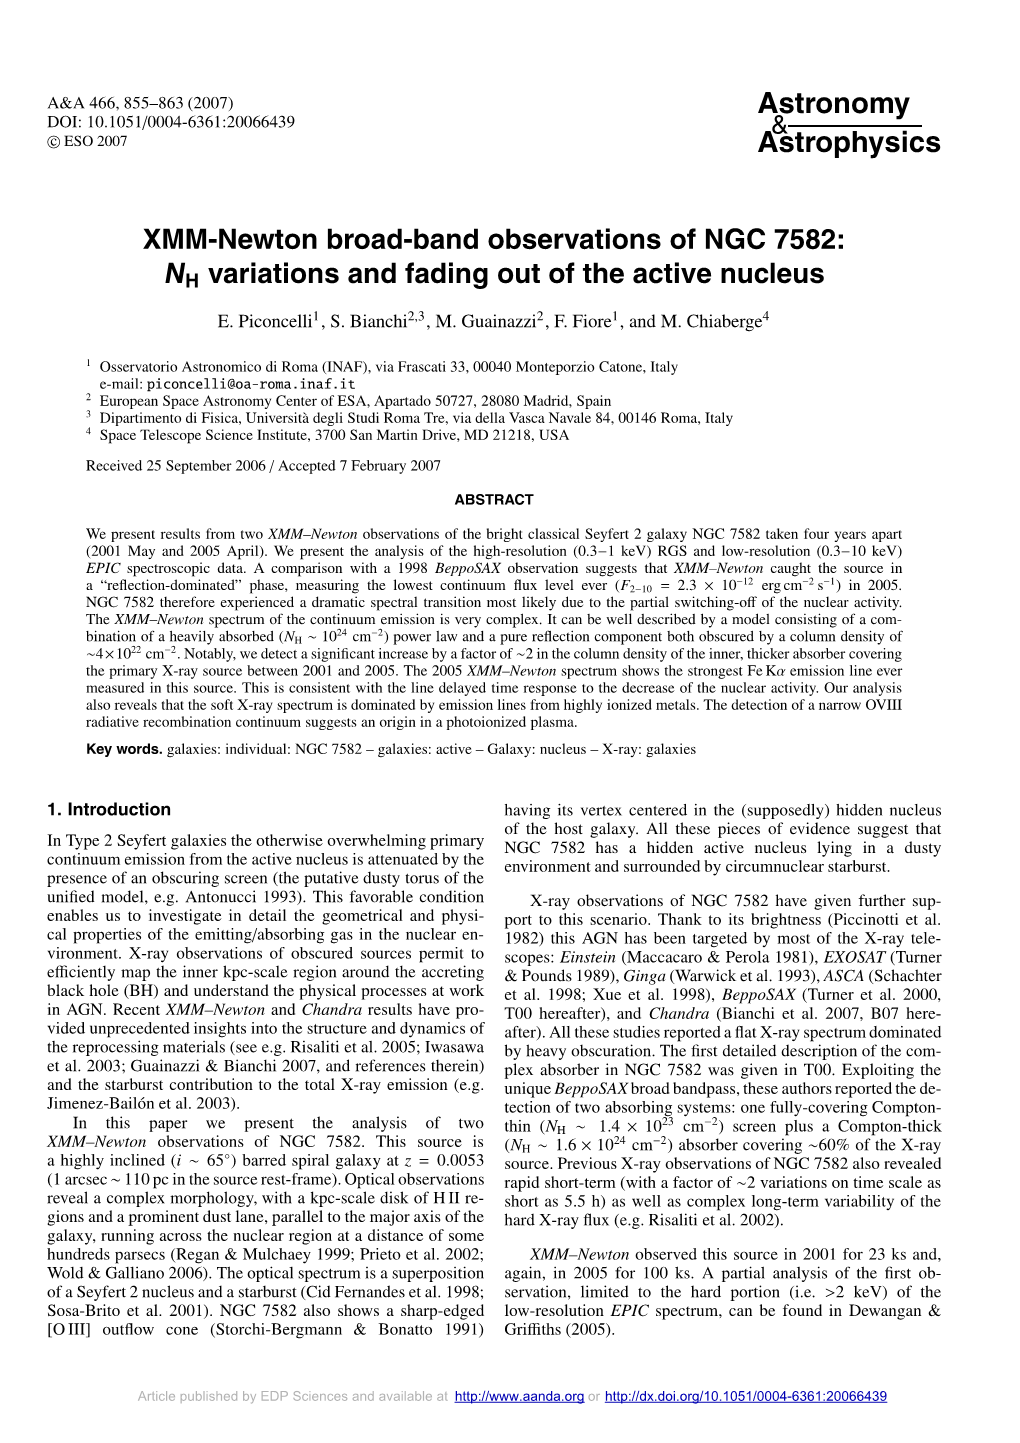 XMM-Newton Broad-Band Observations of NGC 7582: NH Variations and Fading out of the Active Nucleus